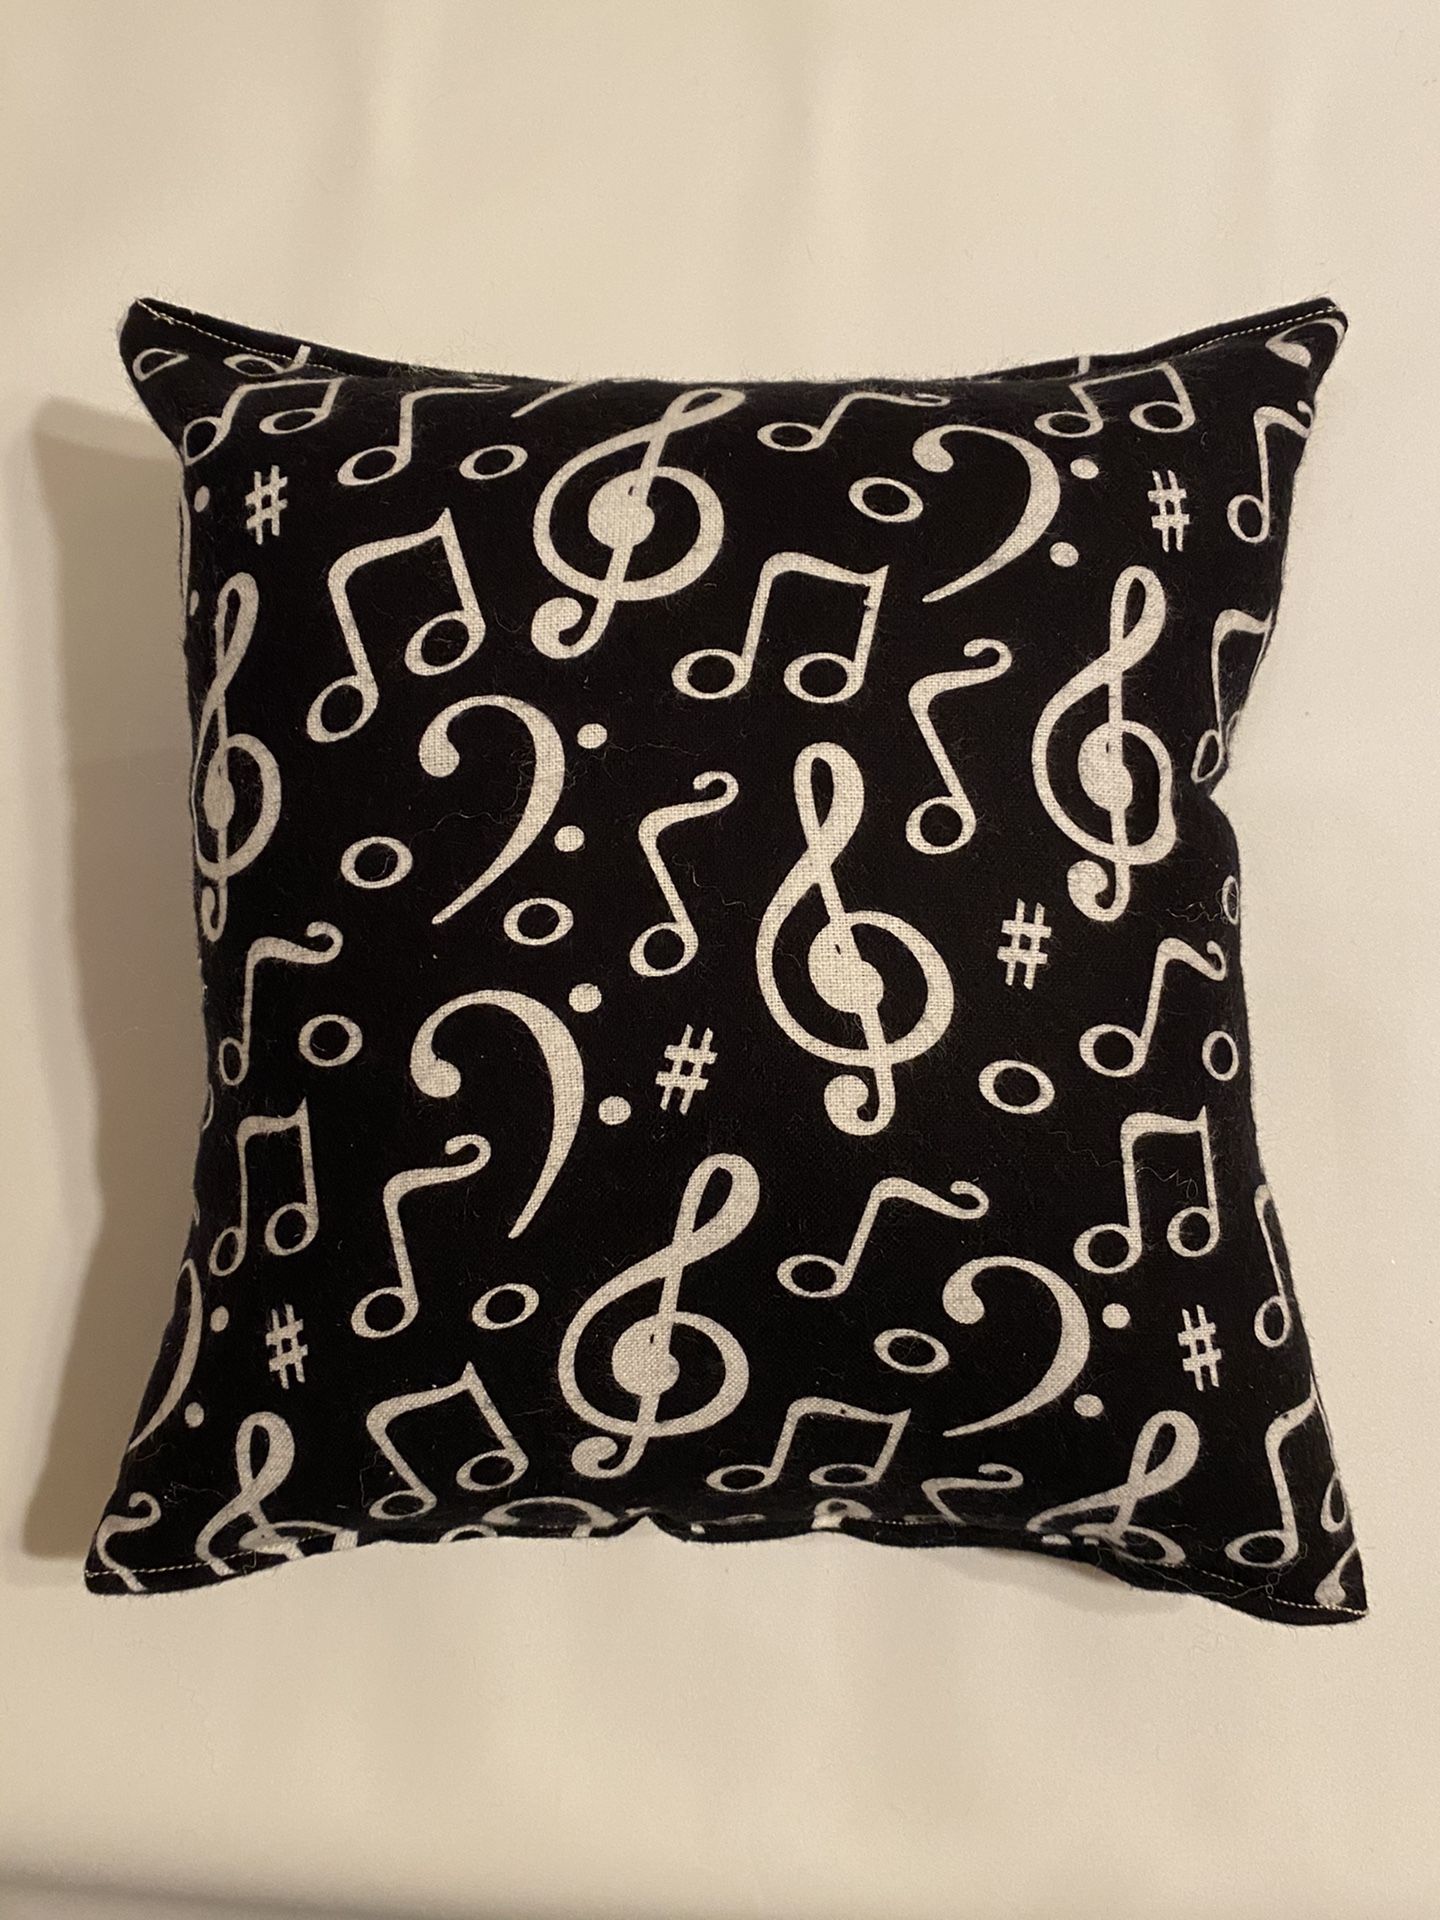 Music note musicians travel size pillow